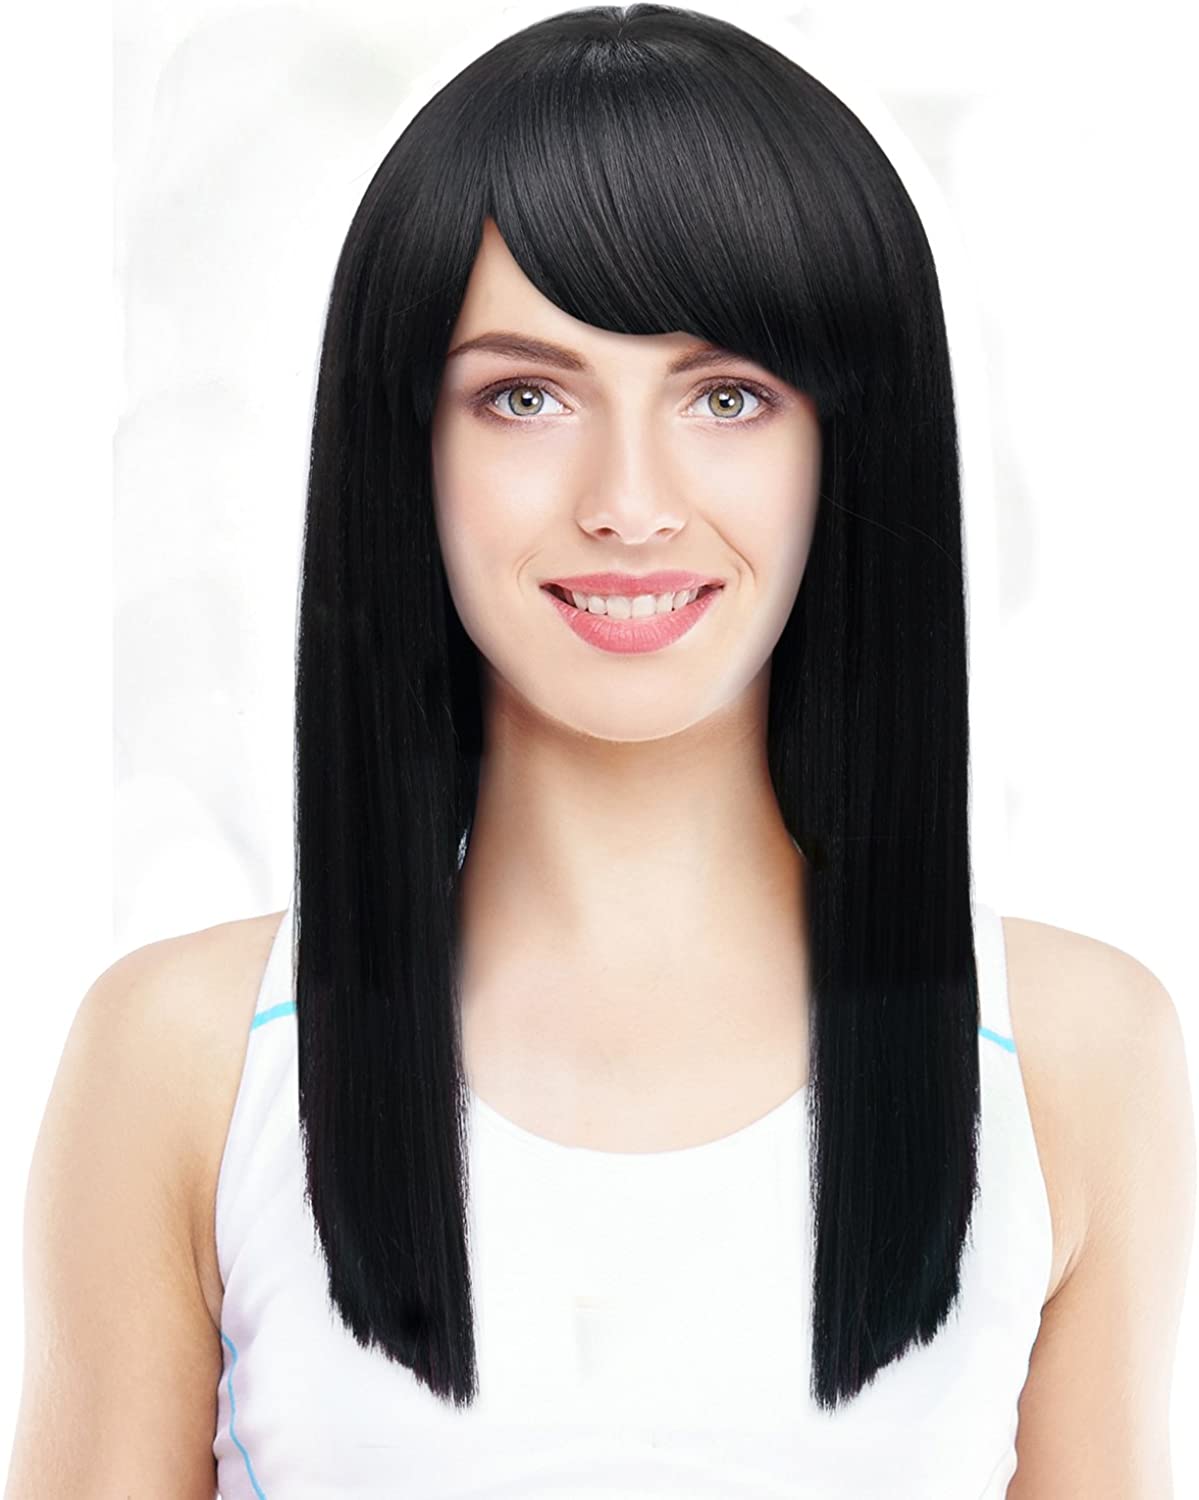 Silky Straight Wig with Bangs Natural Looking Medium Length Blunt Cut Synthetic Full Hair Wig for Women